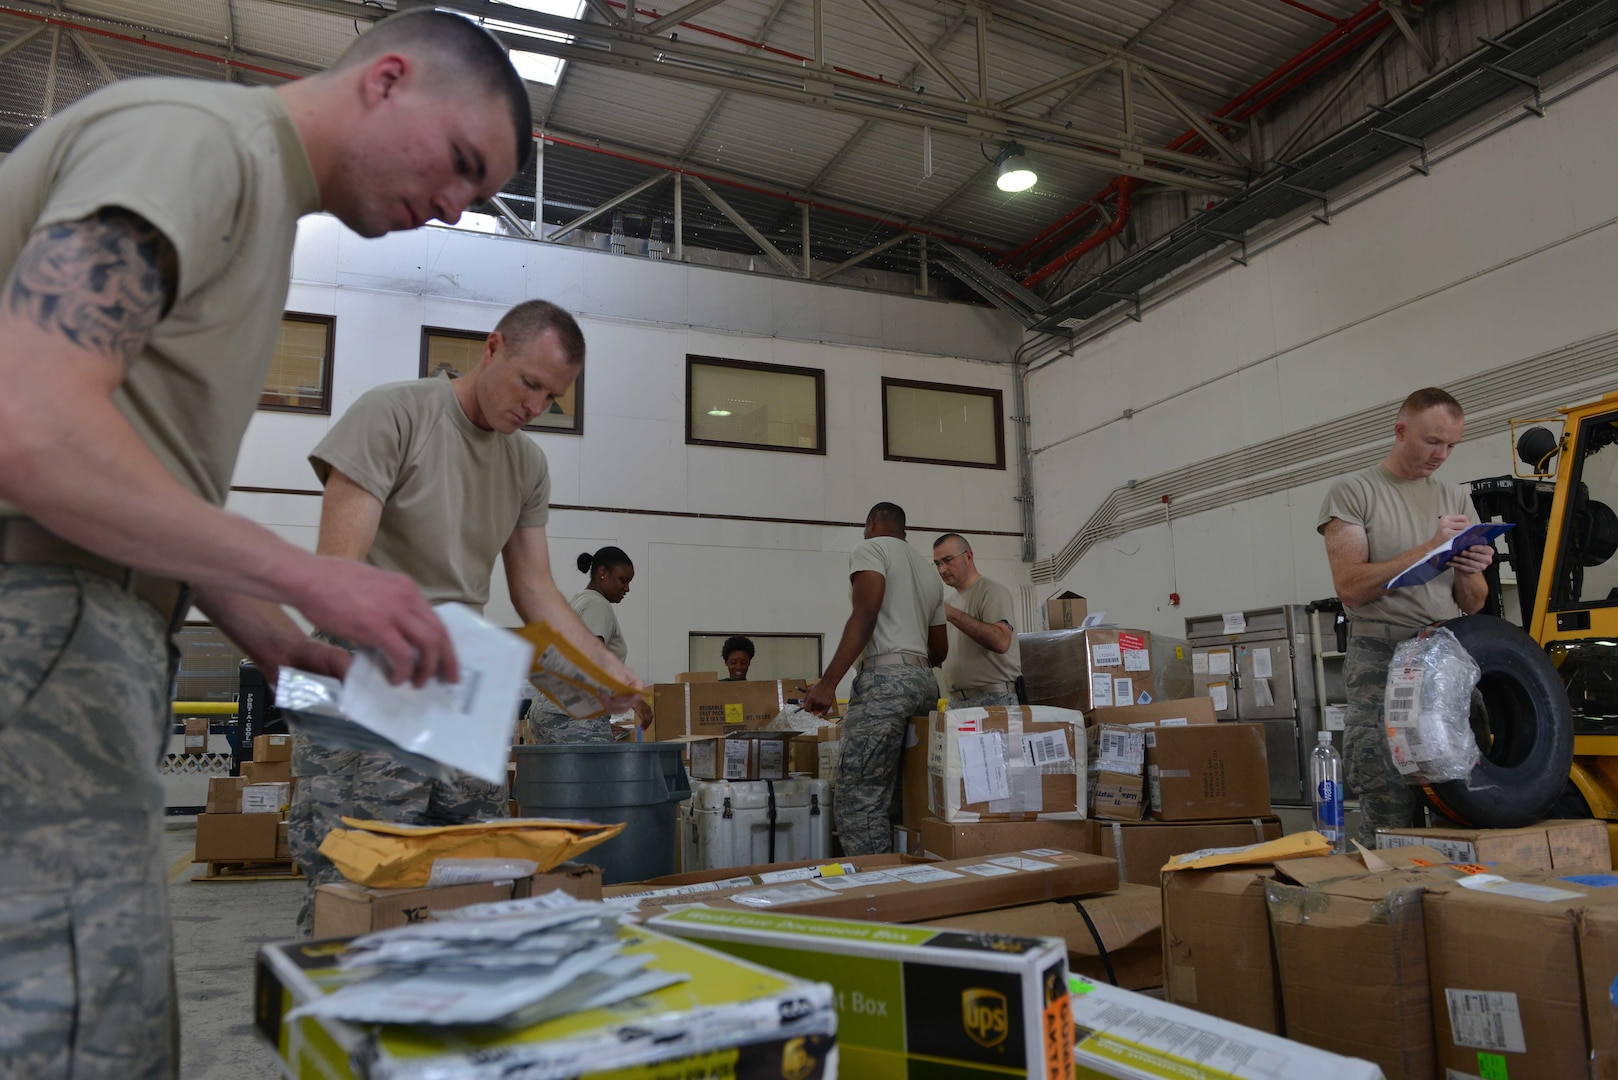 U.S. Airmen assigned to the 39th Logistics Readiness Squadron organize and account for cargo Sept. 29, 2016, at Incirlik Air Base, Turkey. The Airmen are part of the deployment and distribution flight, responsible for the dispersal of cargo around base. (U.S. Air Force photo by Senior Airman John Nieves Camacho)